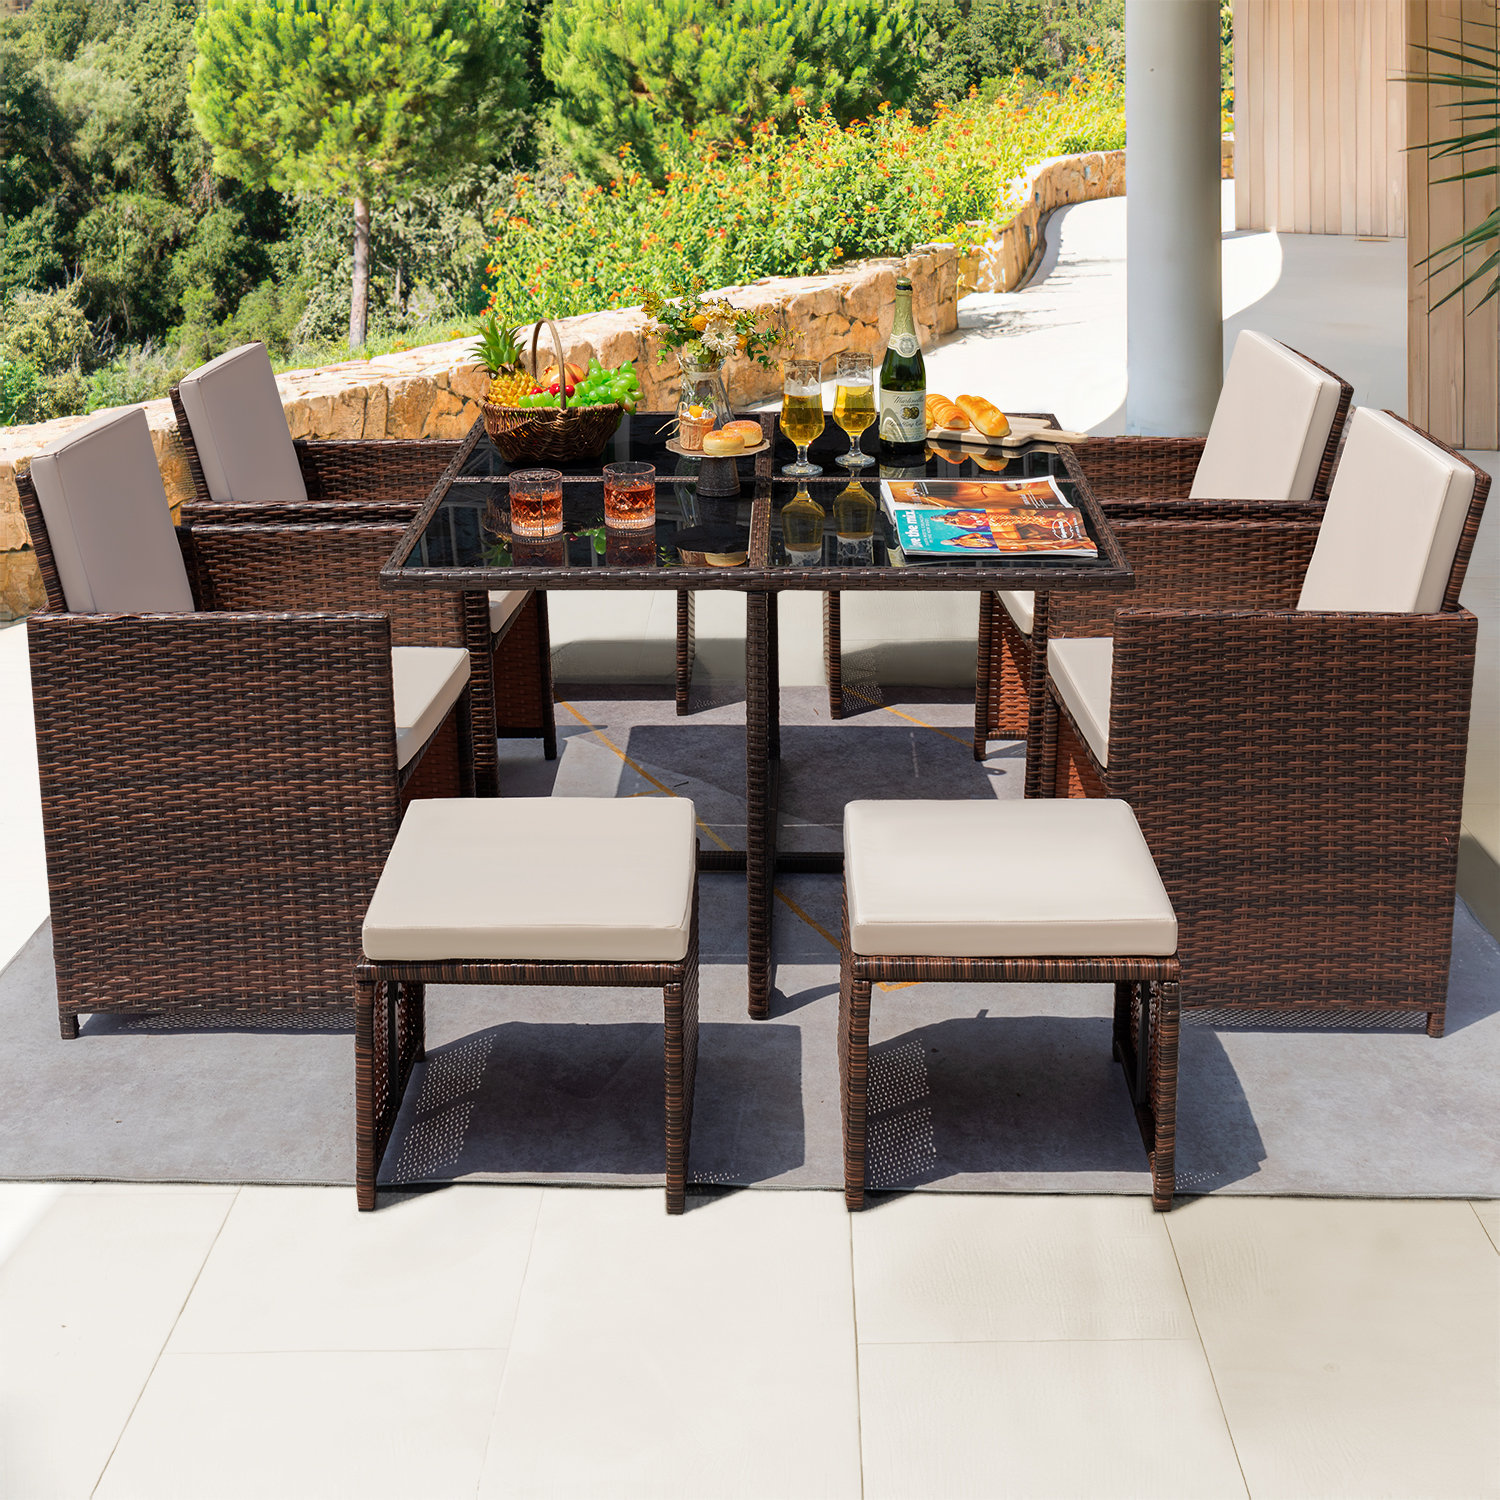 Brown ia Ohio 5-Piece Patio Round Dining Table Set Certified Teak Ideal for Outdoors and Indoors 